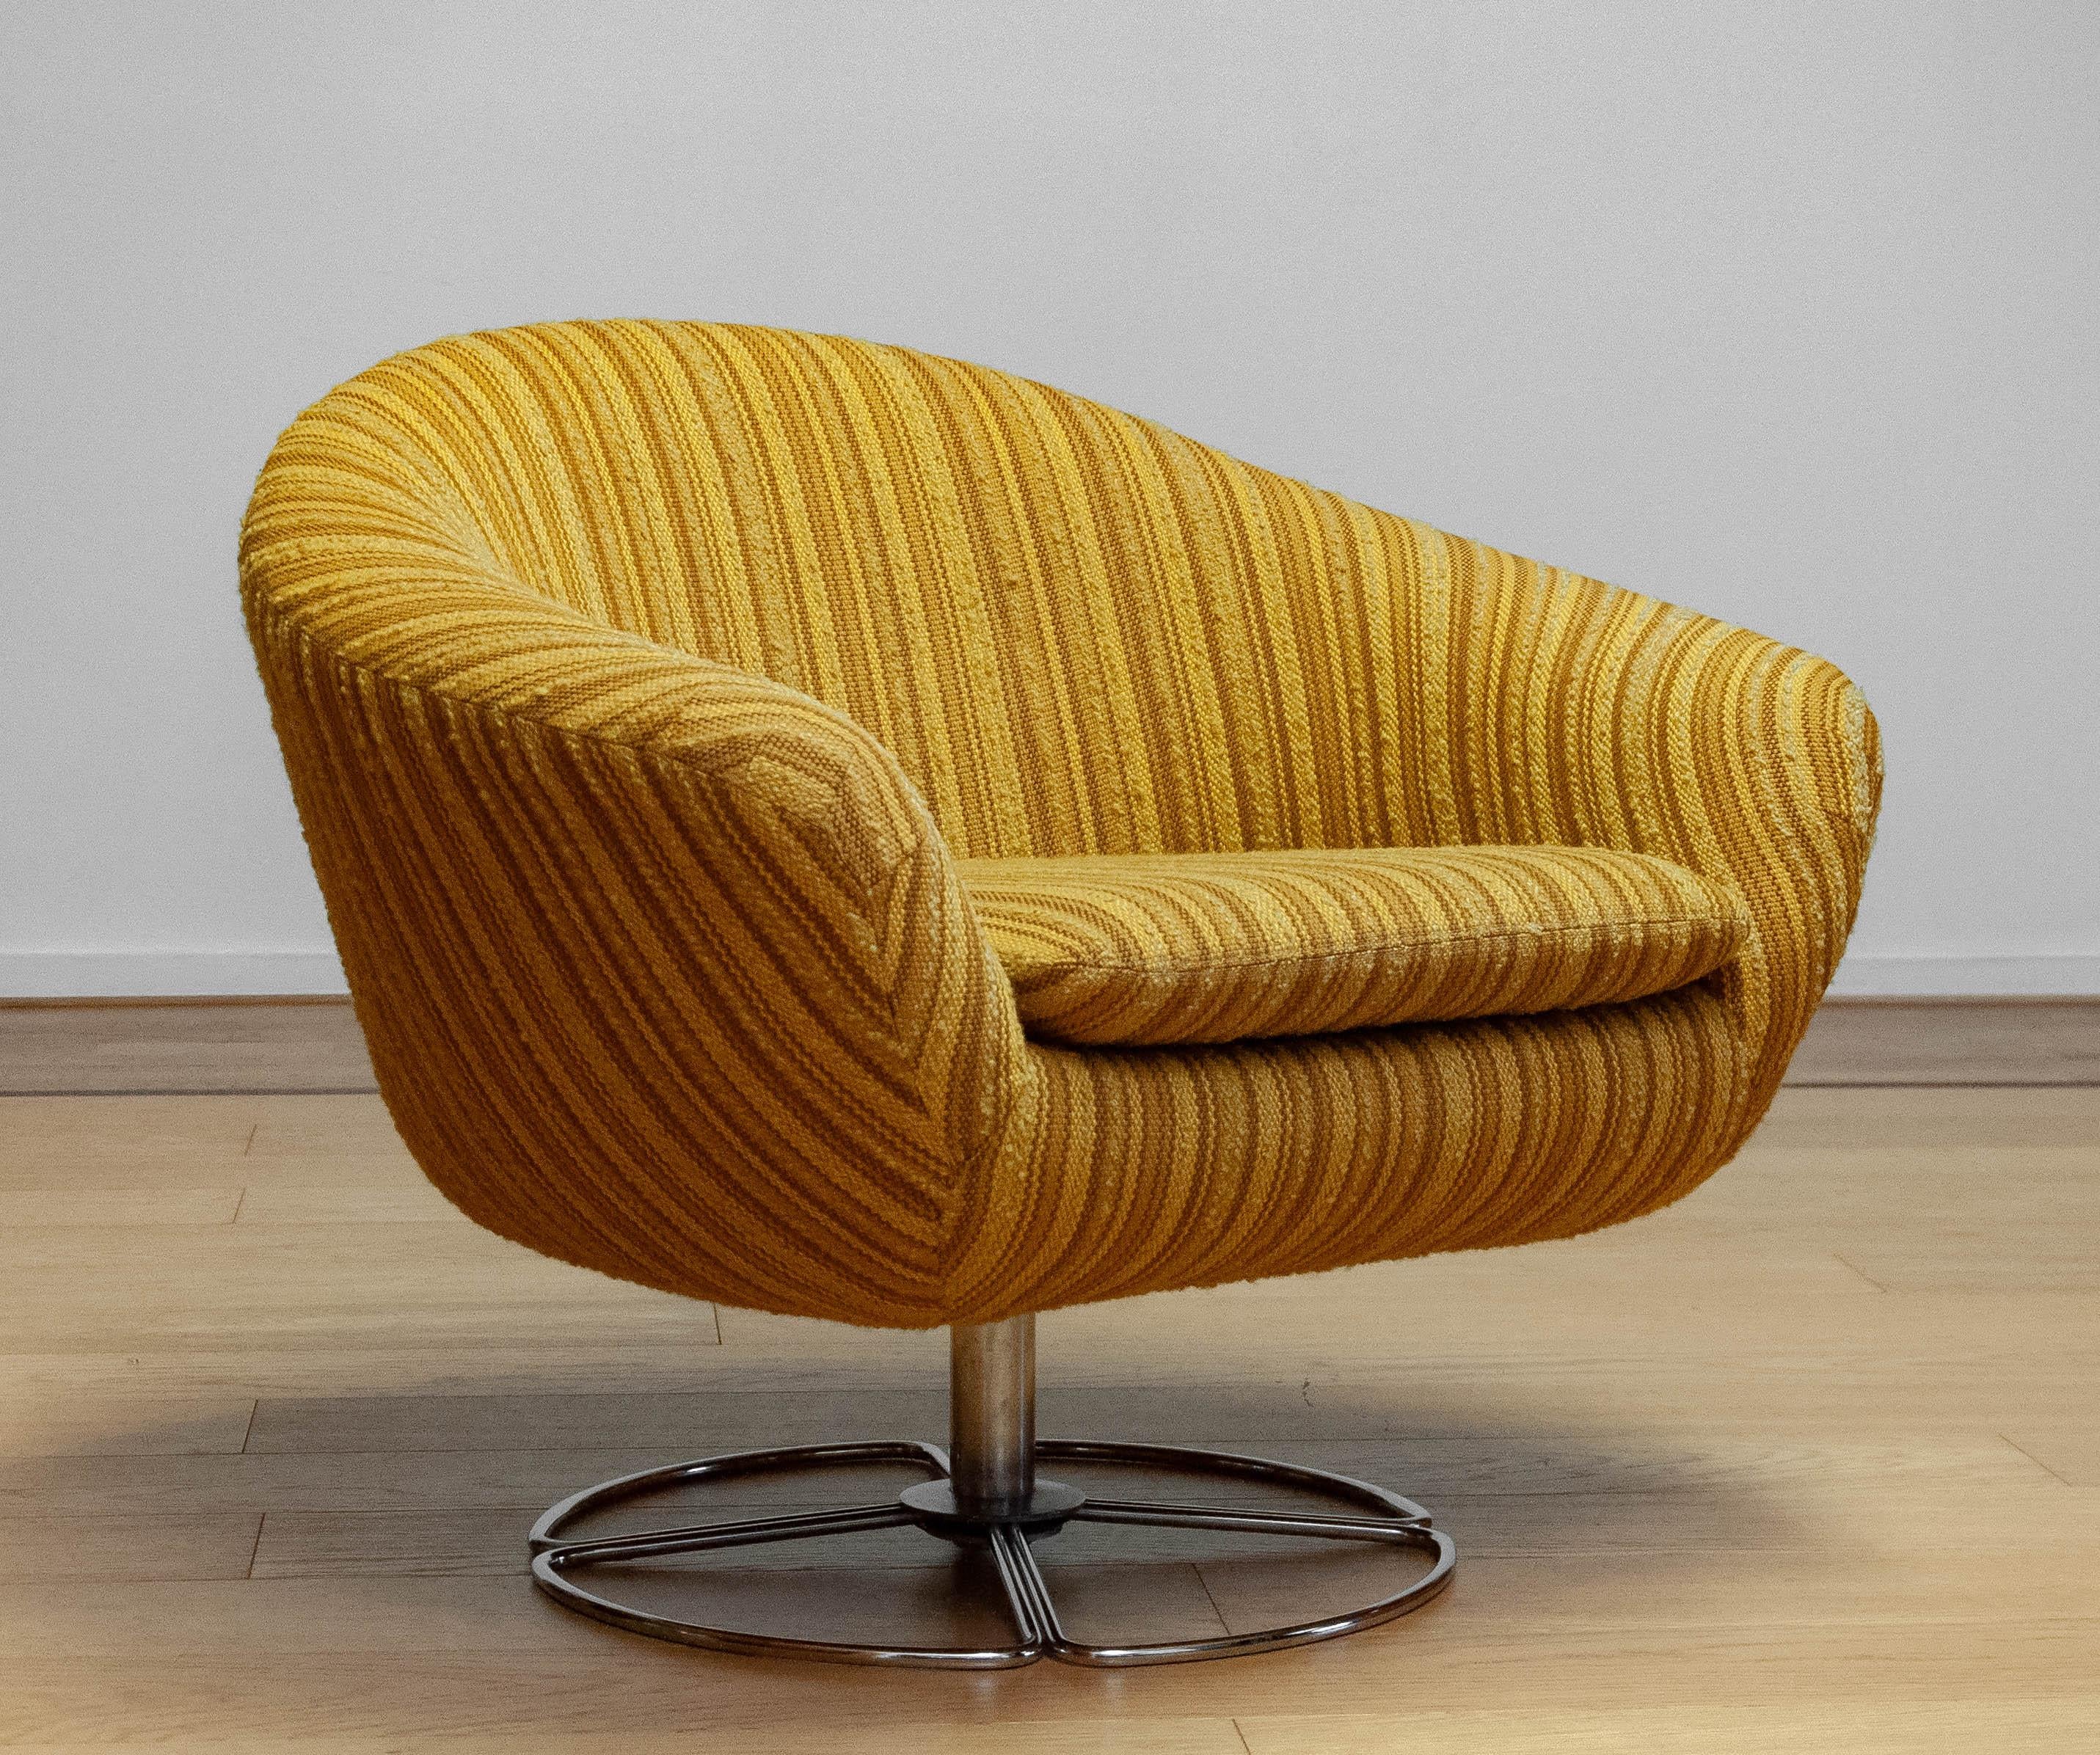 Beautiful pod / swivel chair upholstered with the original maize yellow striped fabric. The chair has been manufactured in the 1960s by the Swedish manufacturer 'Dux of Sweden'. This pod chair is overal in very good condition. 

Please note!
Because